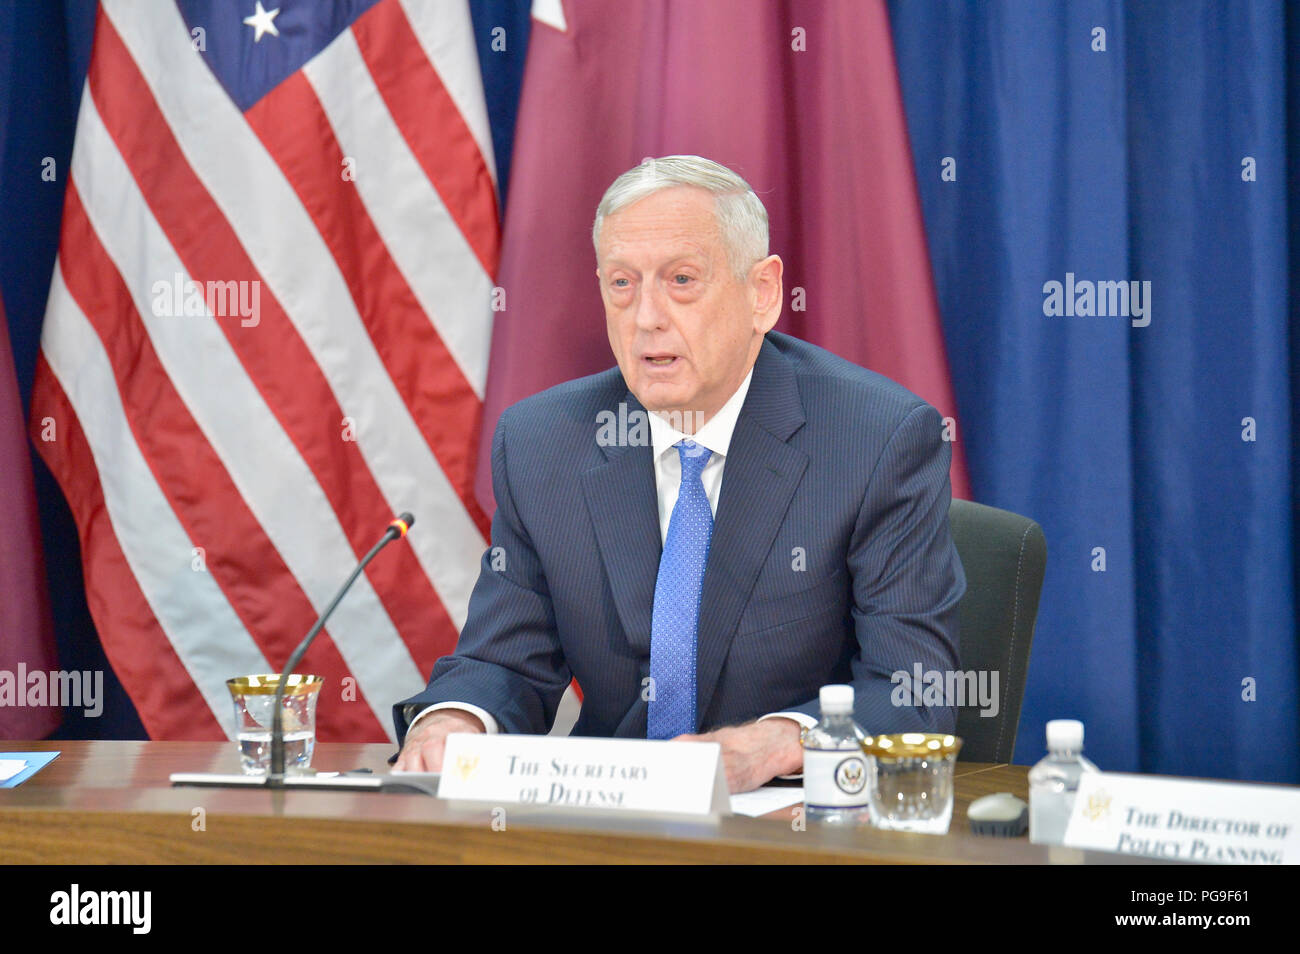 U.S. Secretary of Defense James Mattis delivers remarks at the High-Level Opening Session of the Inaugural U.S.-Qatar Strategic Dialogue at the U.S. Department of State in Washington, D.C. on January 30, 2018. Stock Photo